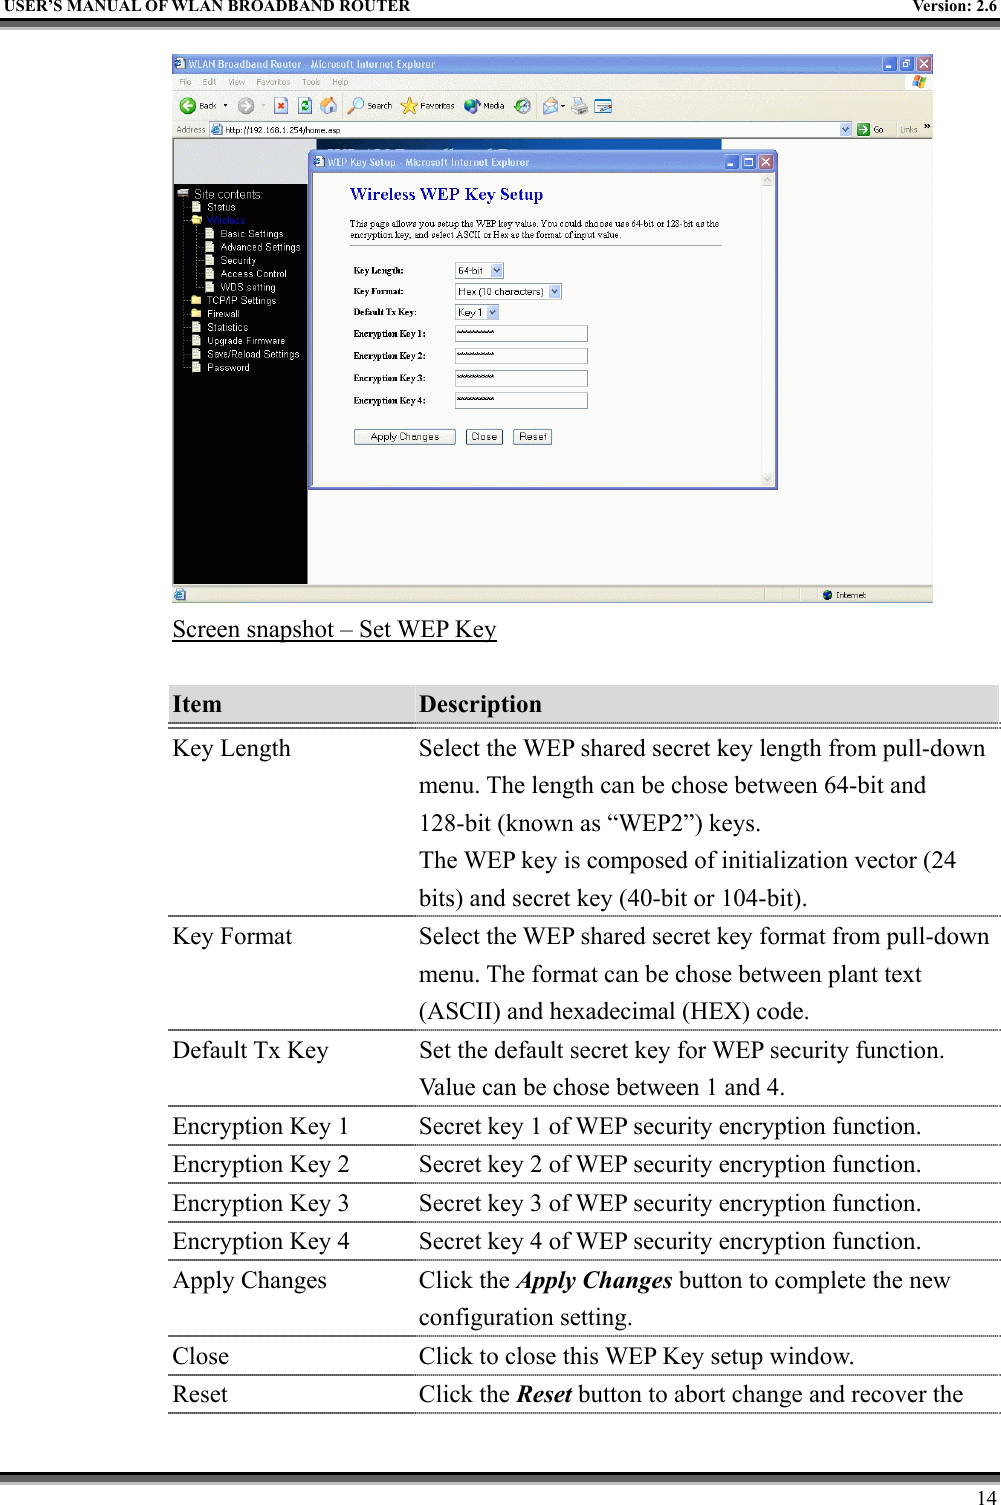   USER’S MANUAL OF WLAN BROADBAND ROUTER    Version: 2.6     14  Screen snapshot – Set WEP Key  Item  Description   Key Length  Select the WEP shared secret key length from pull-down menu. The length can be chose between 64-bit and 128-bit (known as “WEP2”) keys.   The WEP key is composed of initialization vector (24 bits) and secret key (40-bit or 104-bit). Key Format  Select the WEP shared secret key format from pull-down menu. The format can be chose between plant text (ASCII) and hexadecimal (HEX) code. Default Tx Key  Set the default secret key for WEP security function. Value can be chose between 1 and 4. Encryption Key 1  Secret key 1 of WEP security encryption function. Encryption Key 2  Secret key 2 of WEP security encryption function. Encryption Key 3  Secret key 3 of WEP security encryption function. Encryption Key 4  Secret key 4 of WEP security encryption function. Apply Changes  Click the Apply Changes button to complete the new configuration setting. Close  Click to close this WEP Key setup window. Reset Click the Reset button to abort change and recover the 